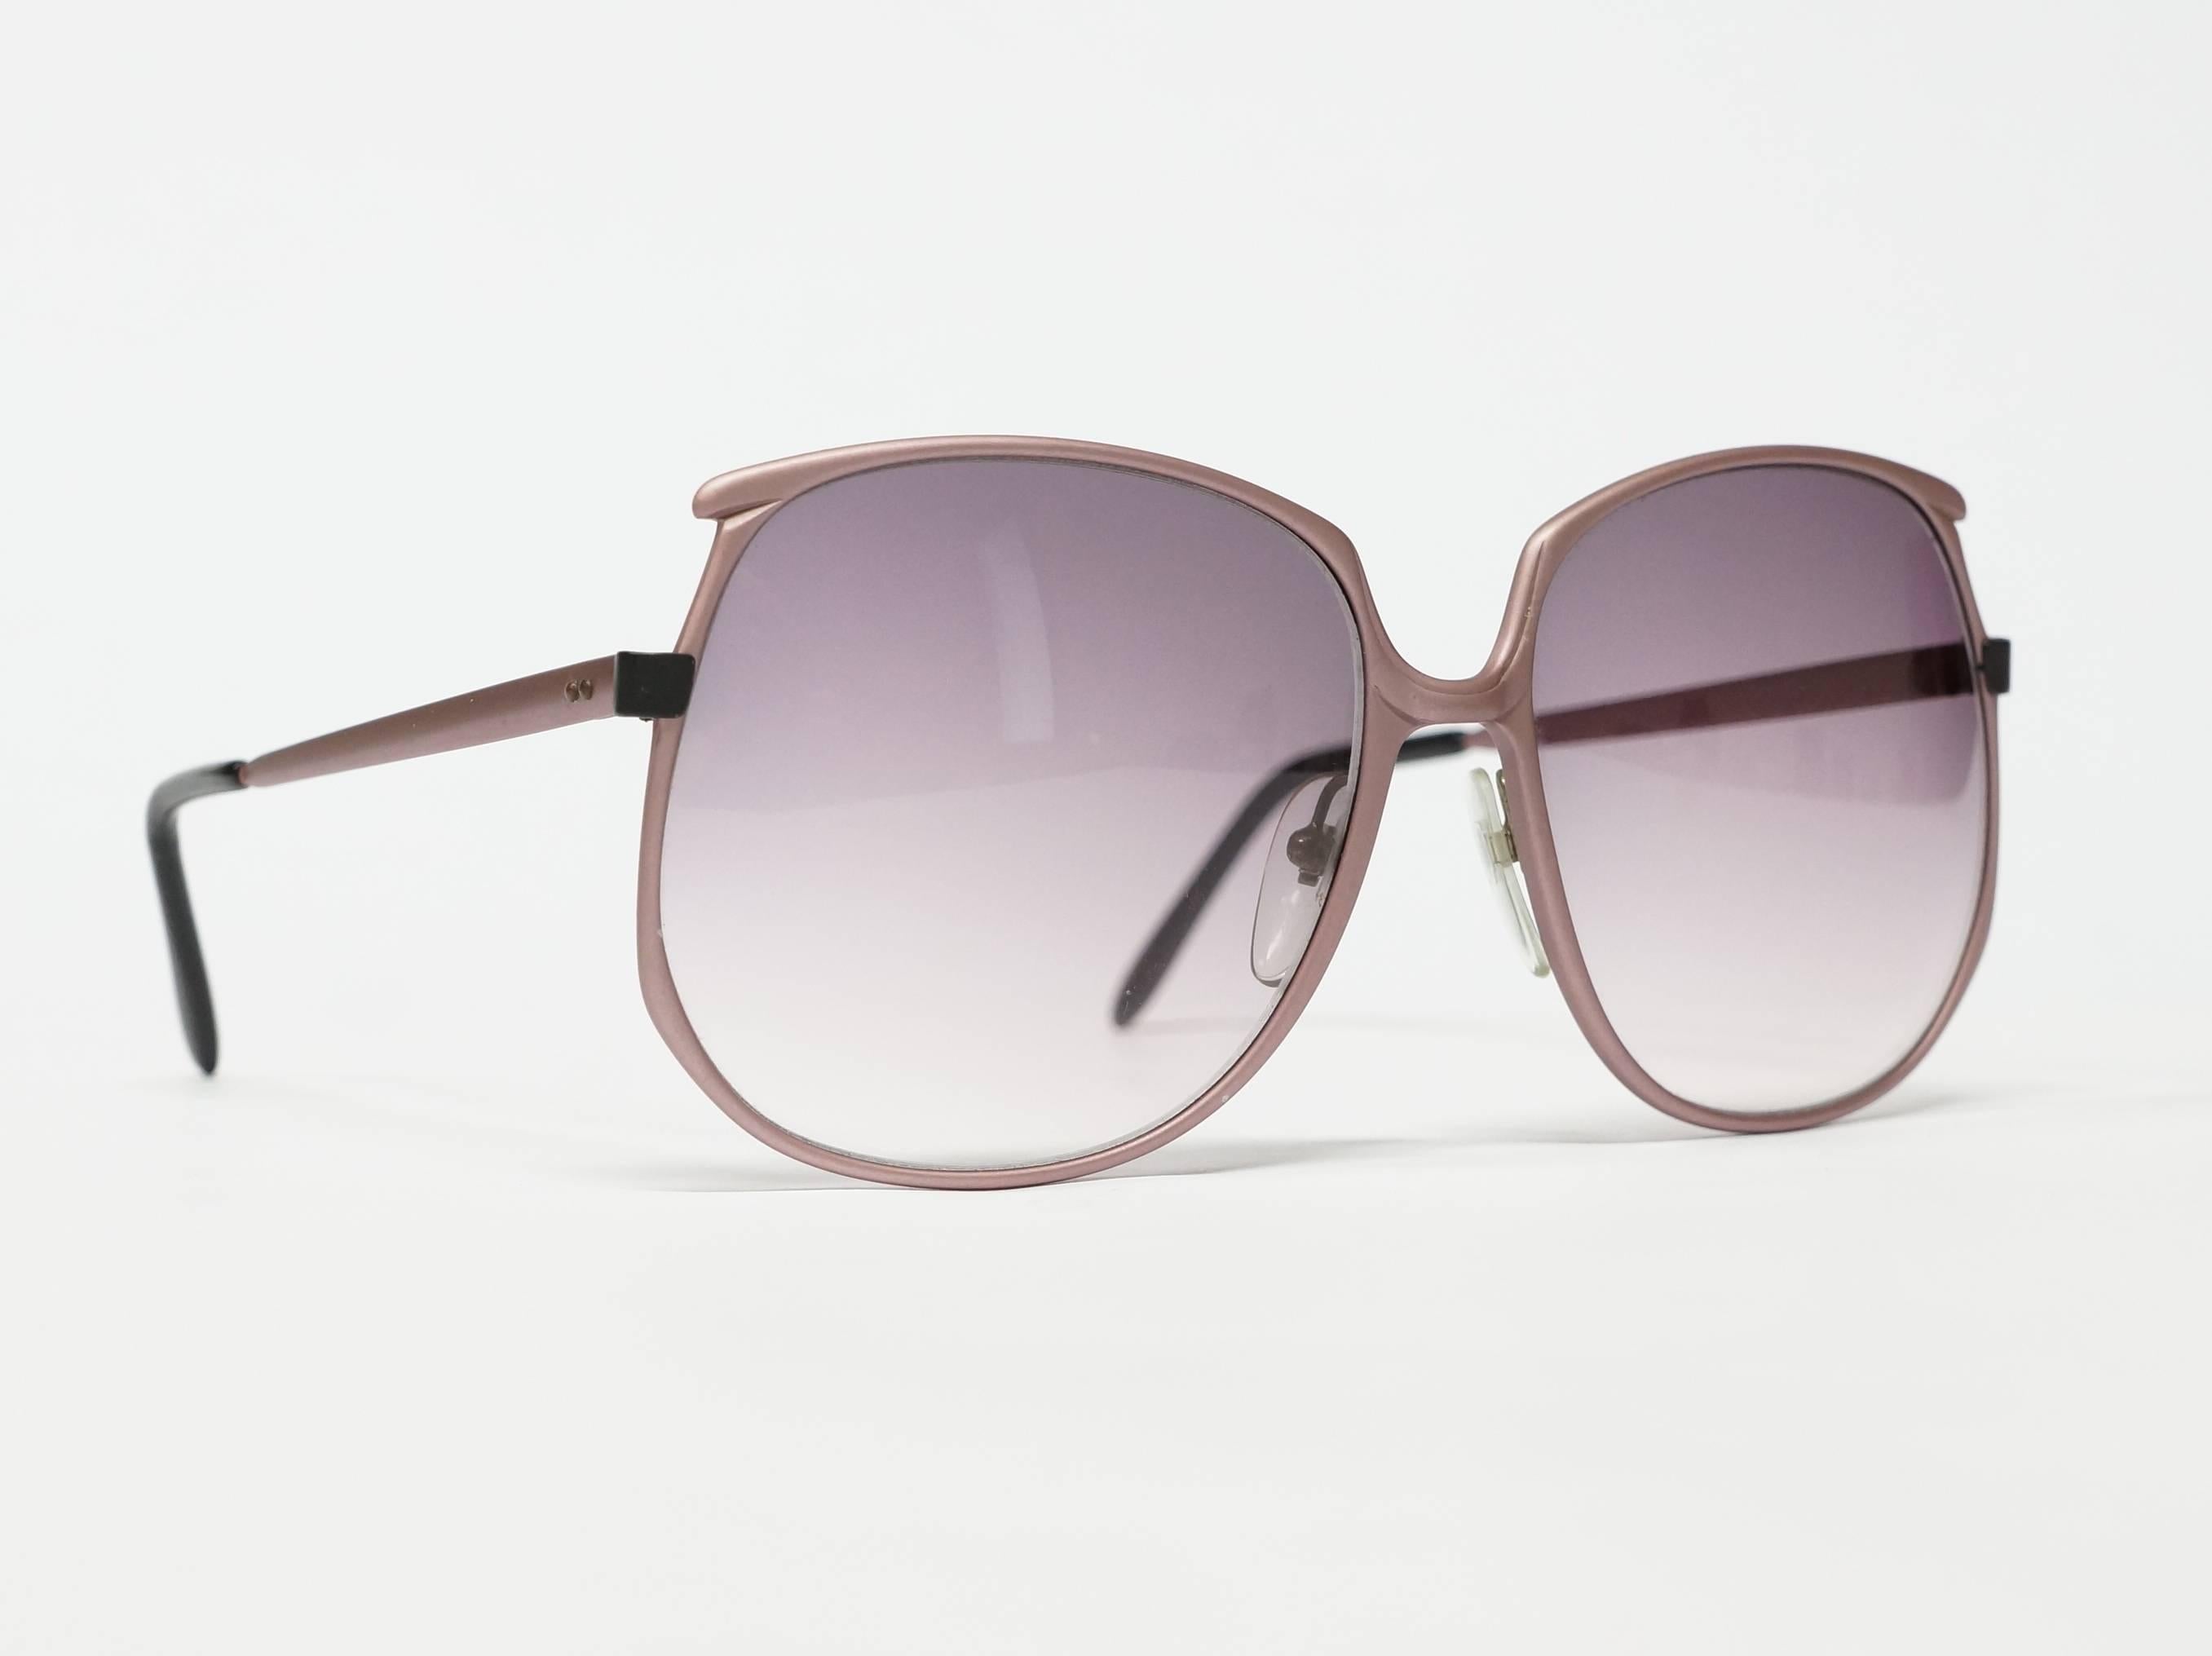 1980s Italian sunglasses by Lamborghini. Matte rose oversized metal frame in new old stock condition.

model: 3020

approximate dimensions: 
temple length: 140mm - 5 1/2